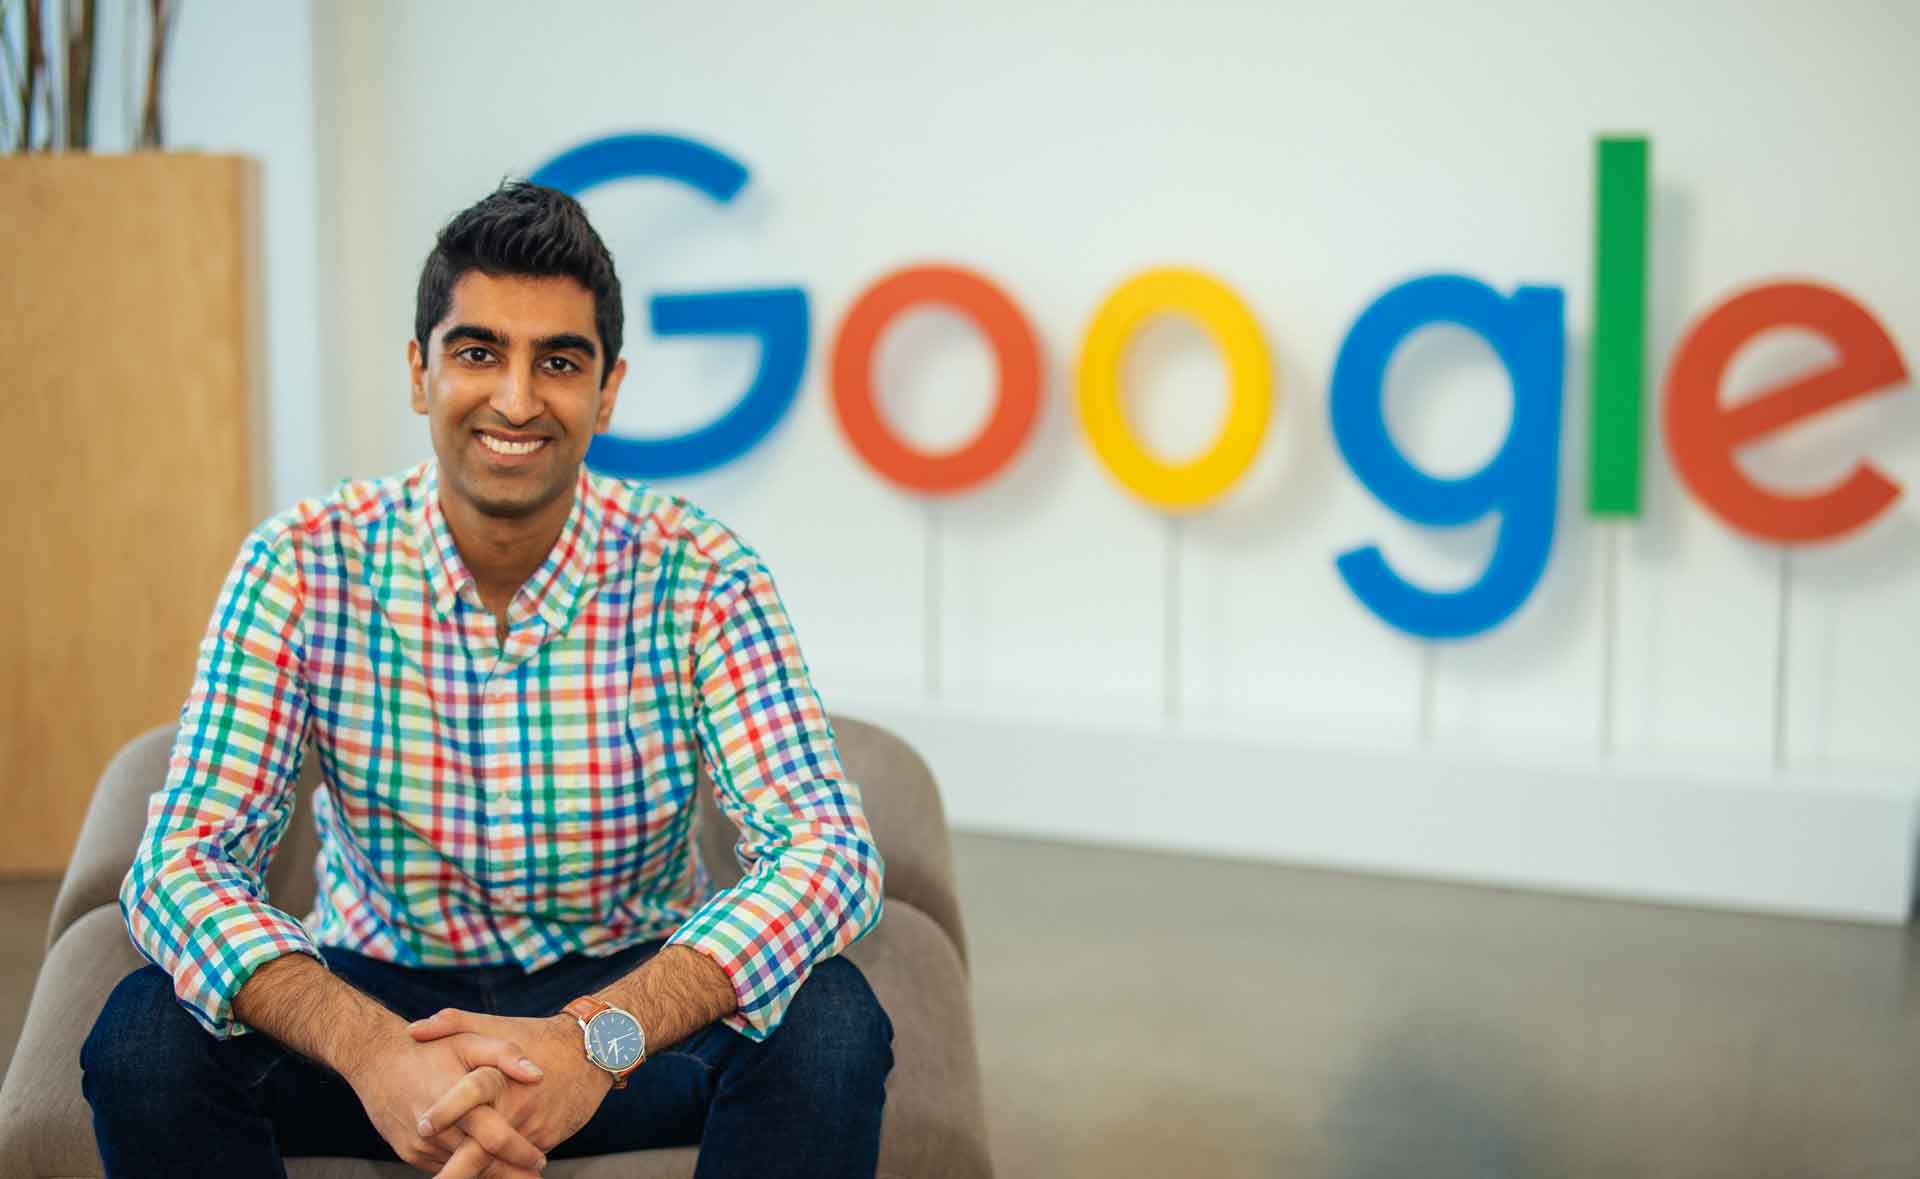 Al Rahim Merali sitting in front of a Google sign